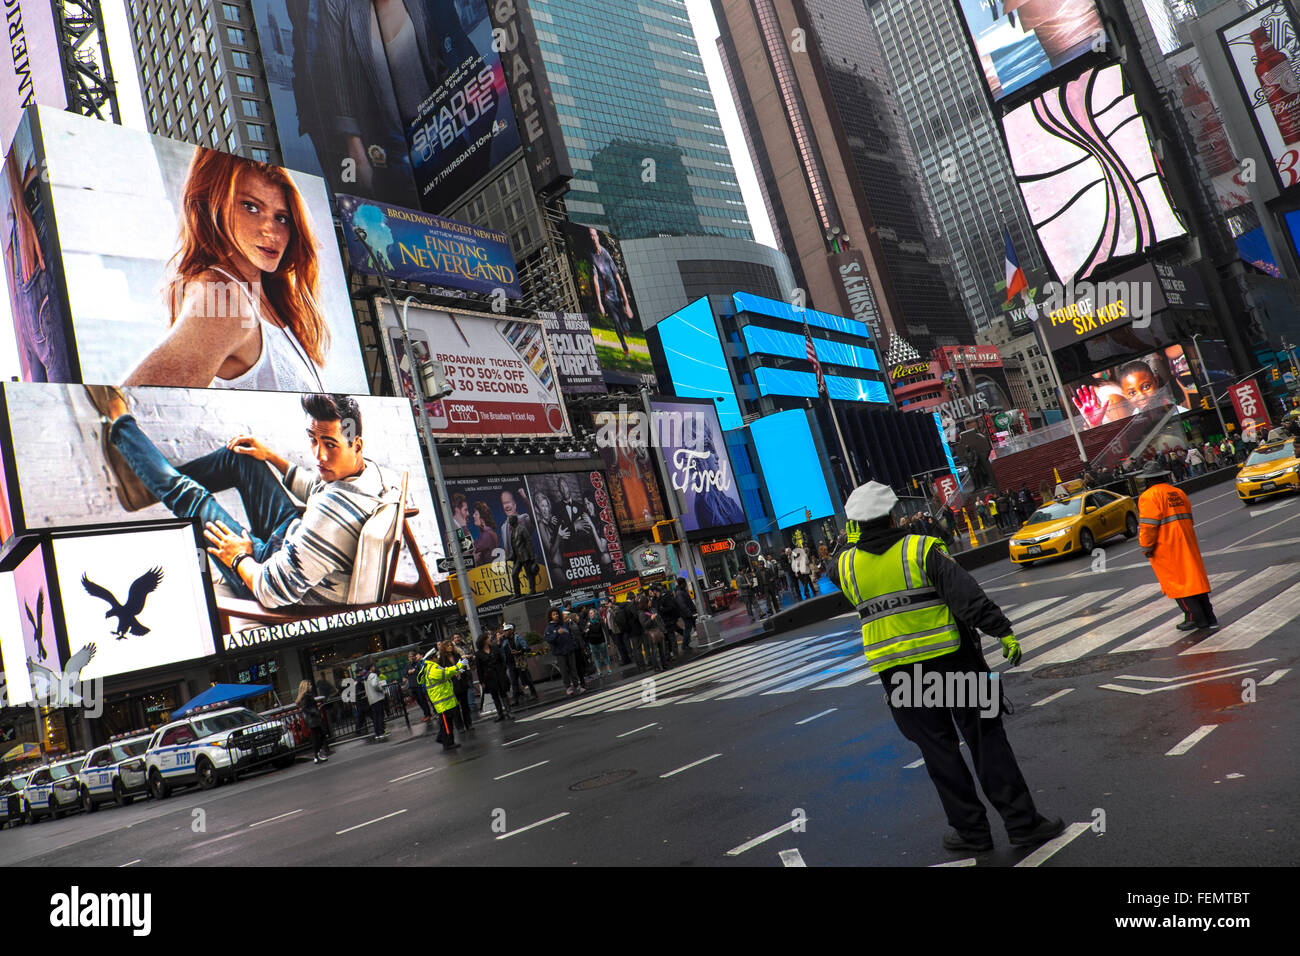 New York Police Department traffic officer, directing traffic in busy Times Square, New York, USA Stock Photo